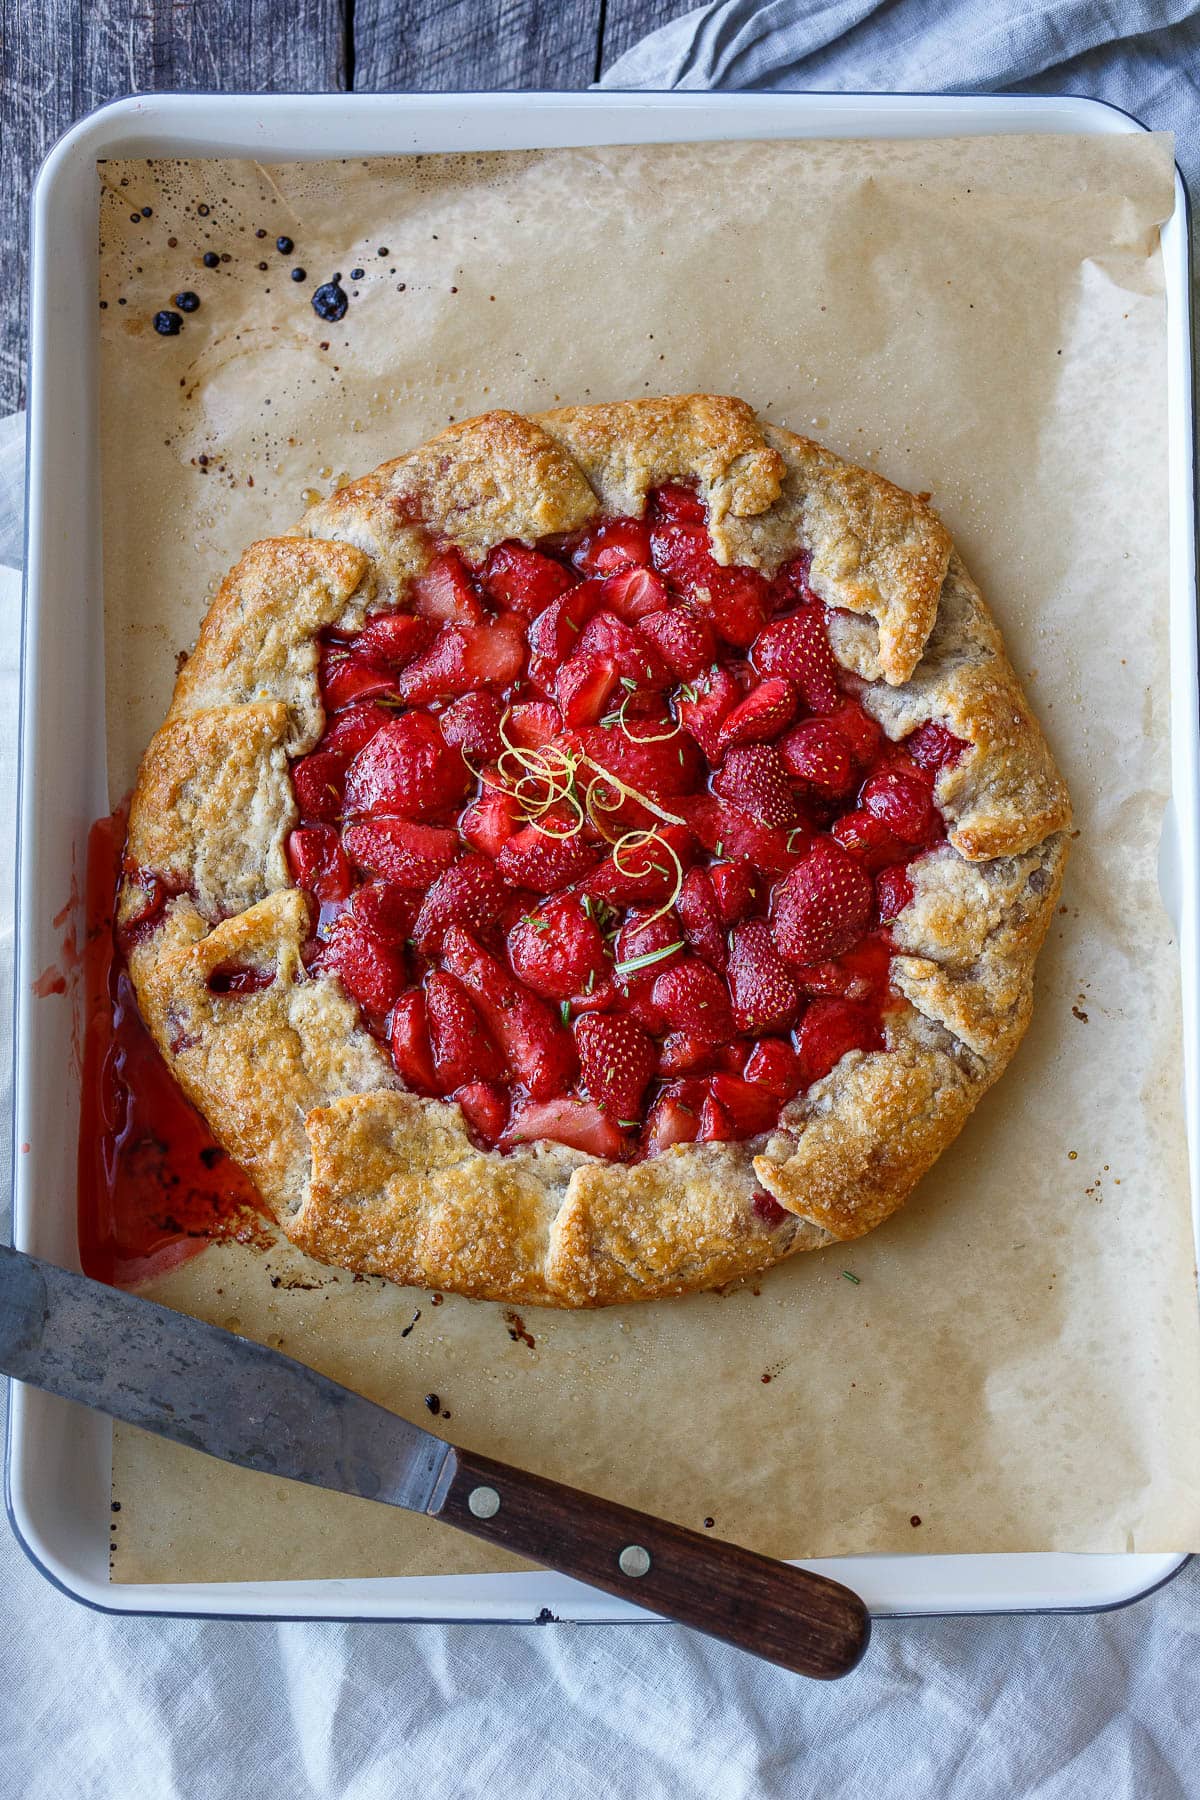 This Strawberry Galette is bright, cheery, and full of springtime flavor. Lemon and rosemary perfectly complement the sweet-tart berries. A rustic flaky rye pastry crust encloses the succulent filling.